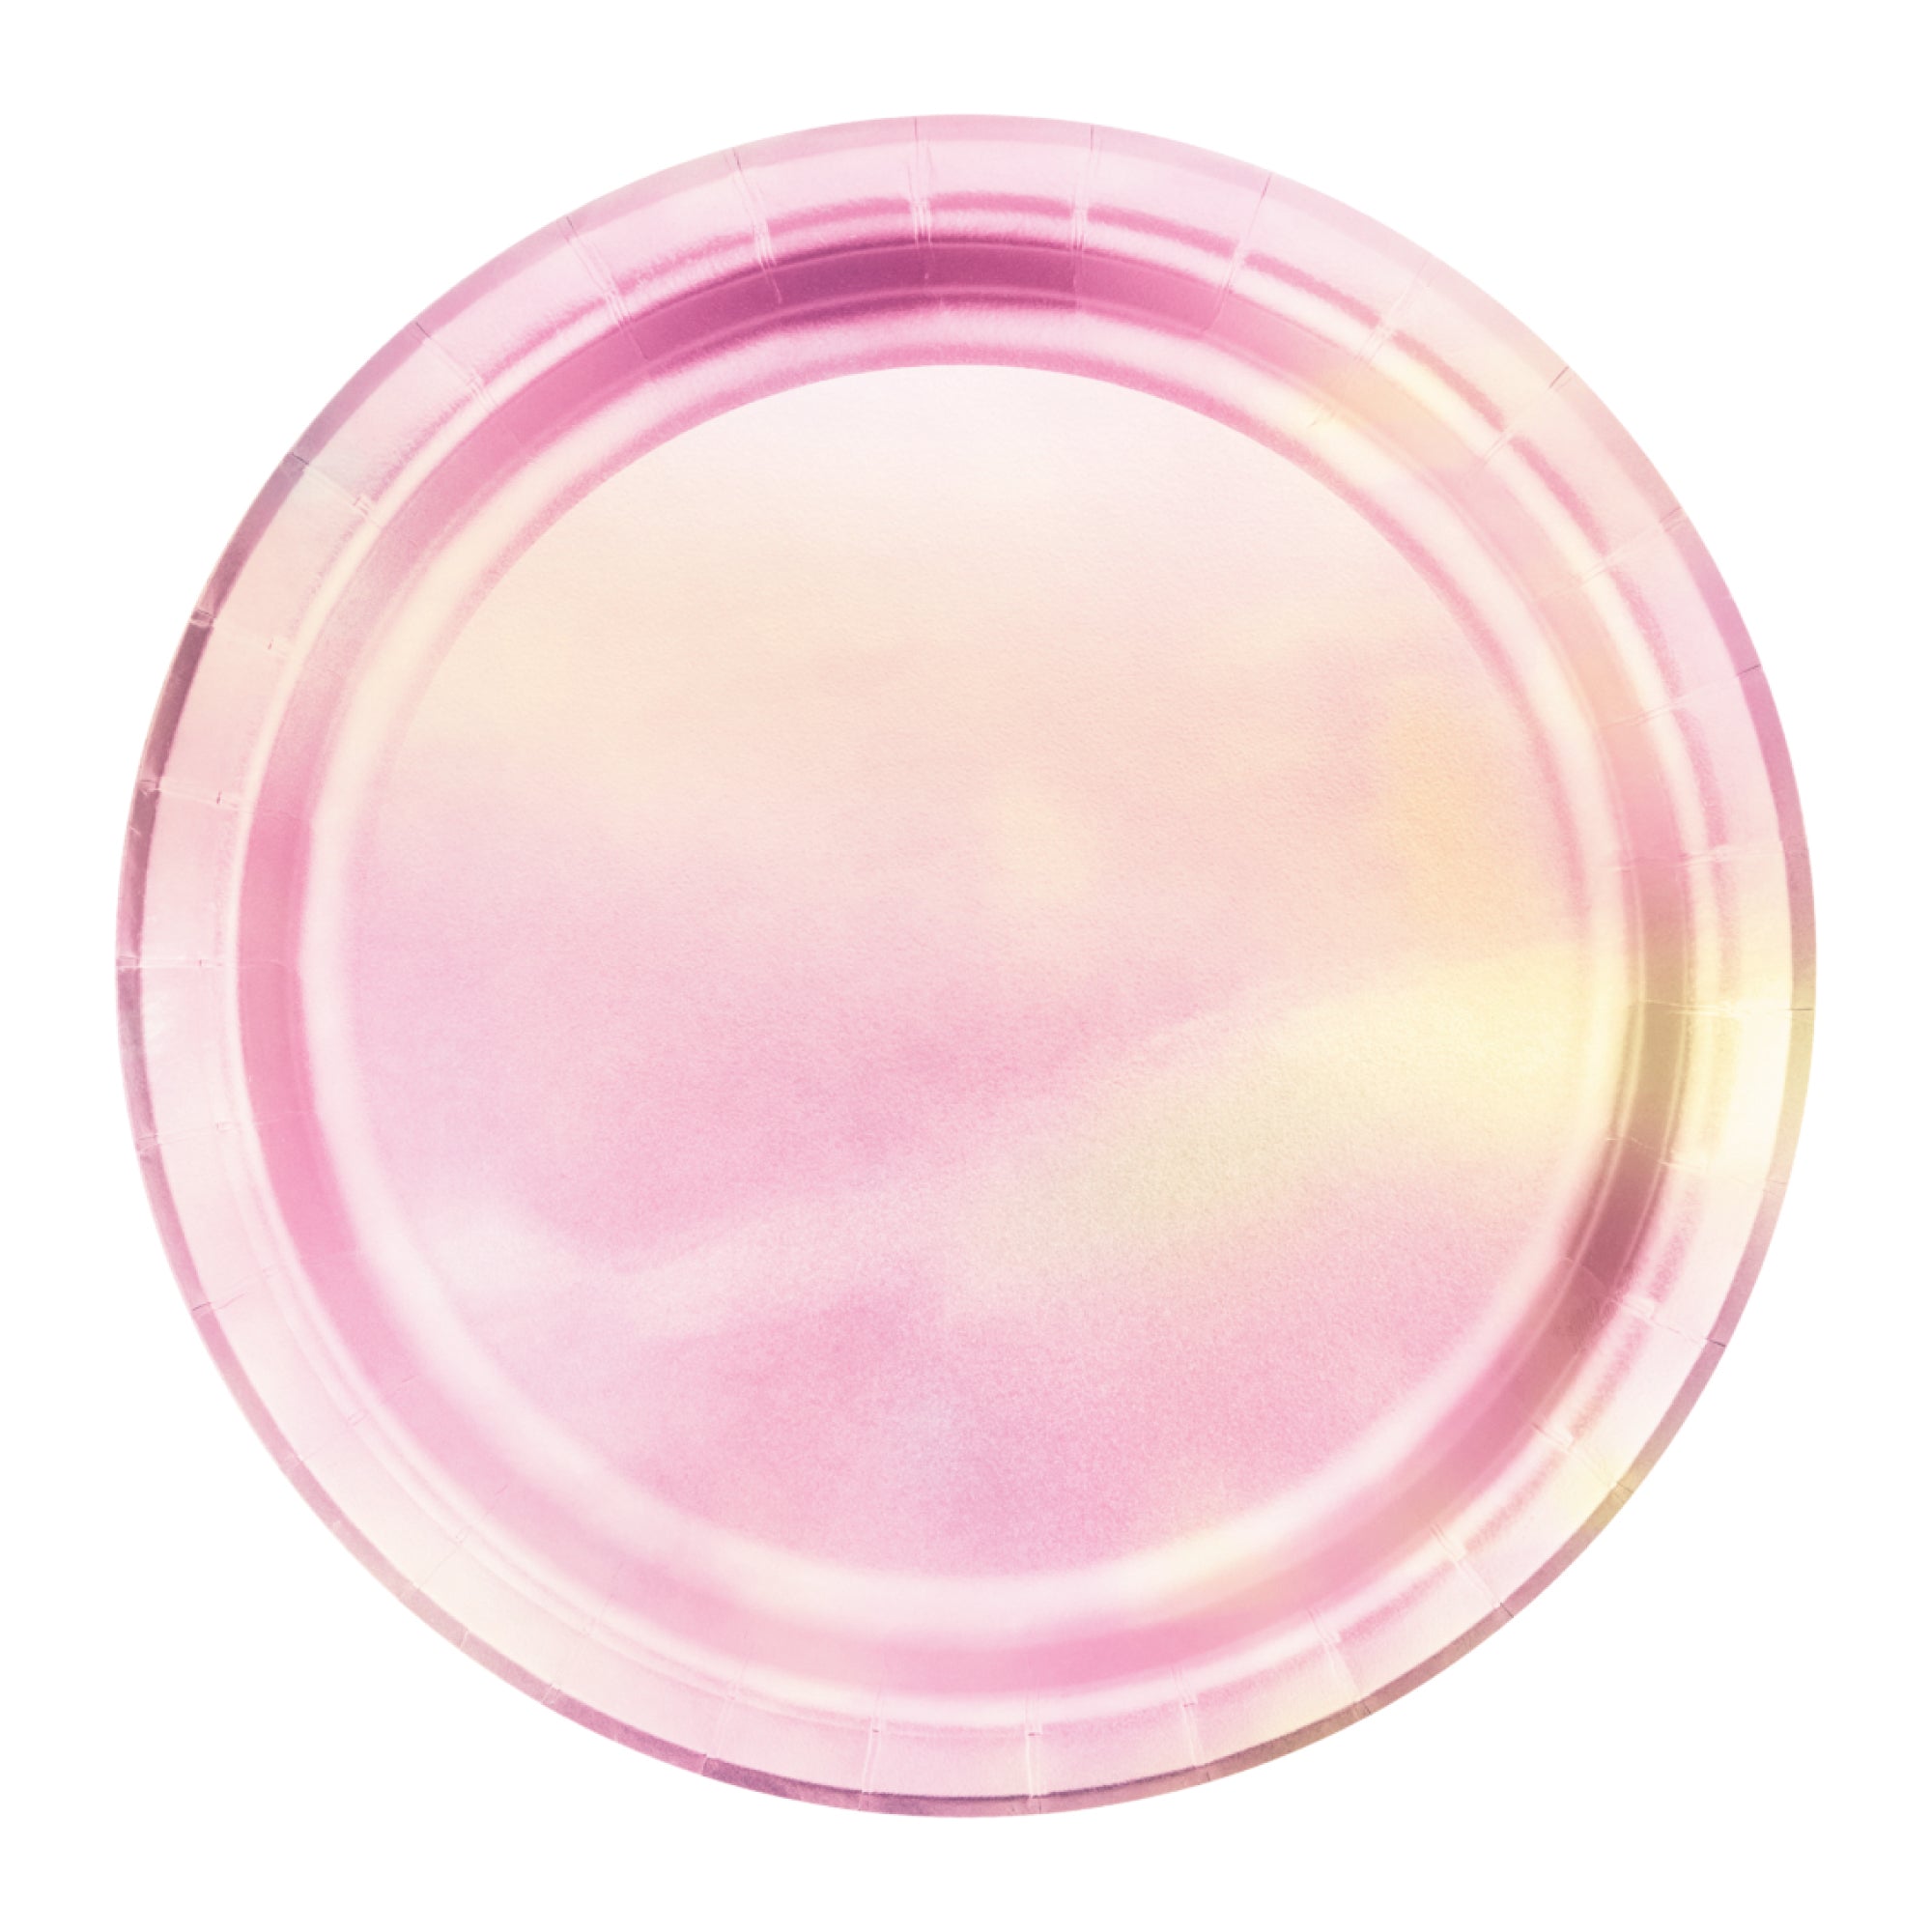 Iridescent Lunch Plates 8ct | The Party Darling